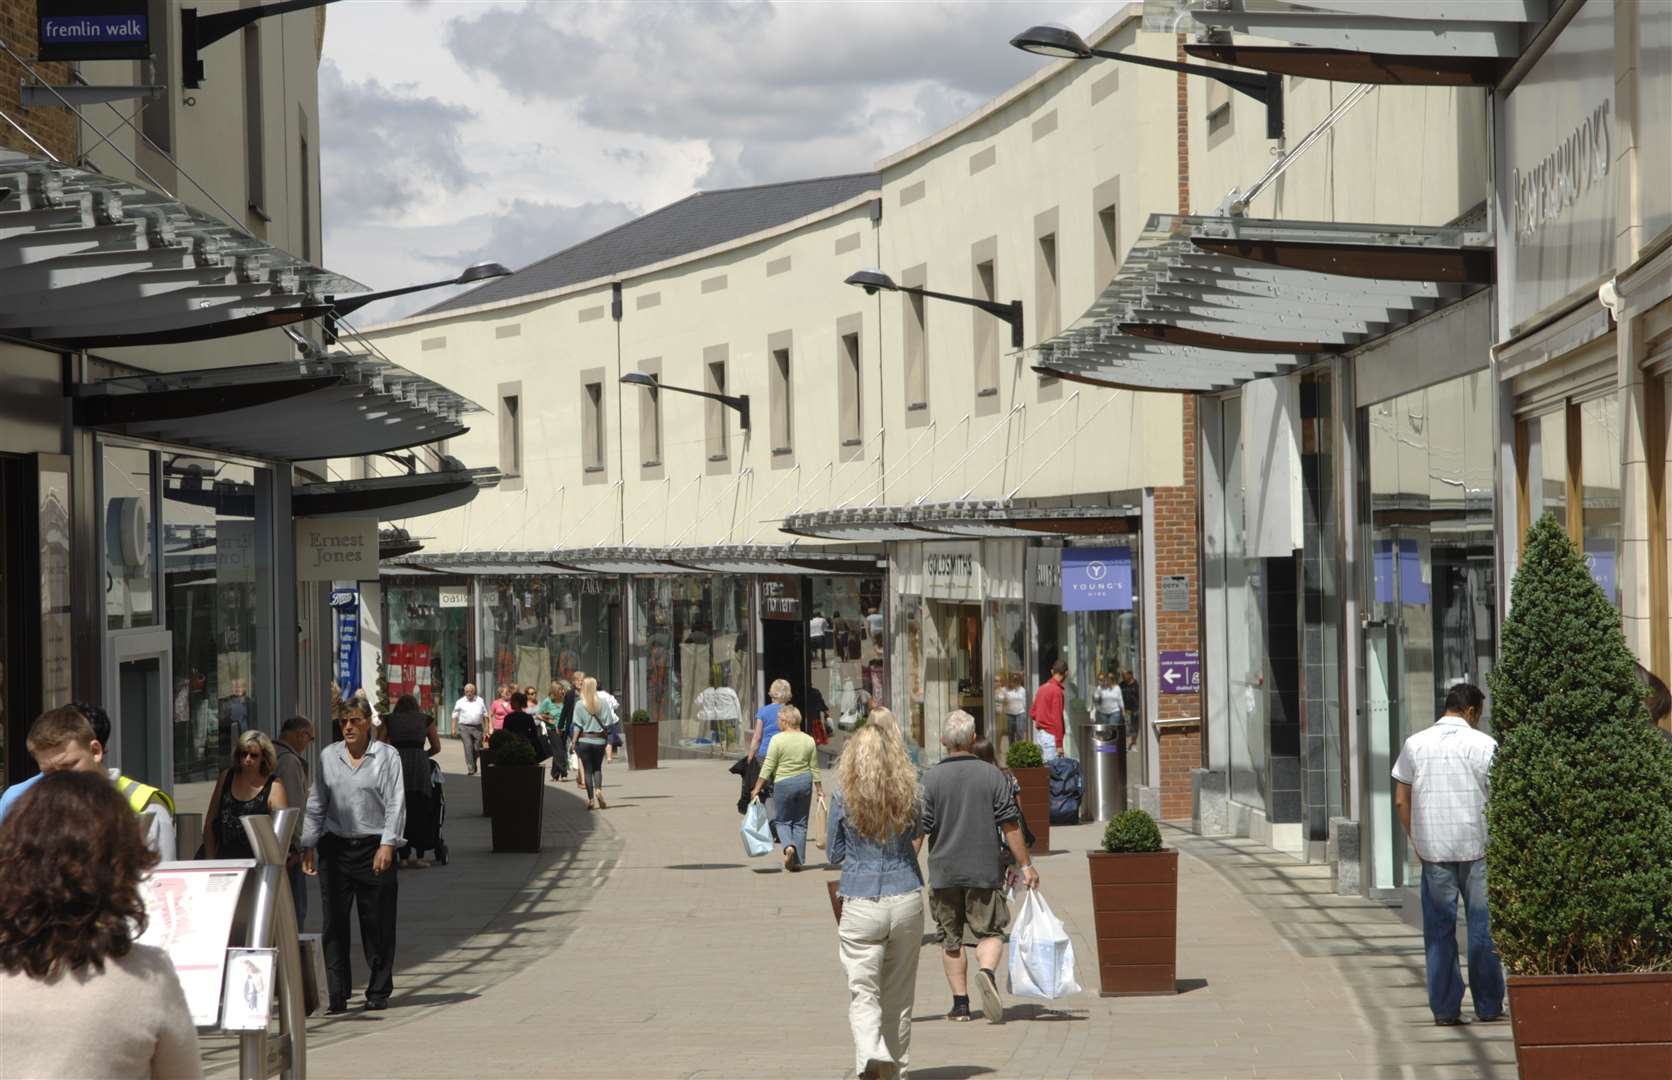 Fremlin Walk has ensured Maidstone has a compelling town centre offering